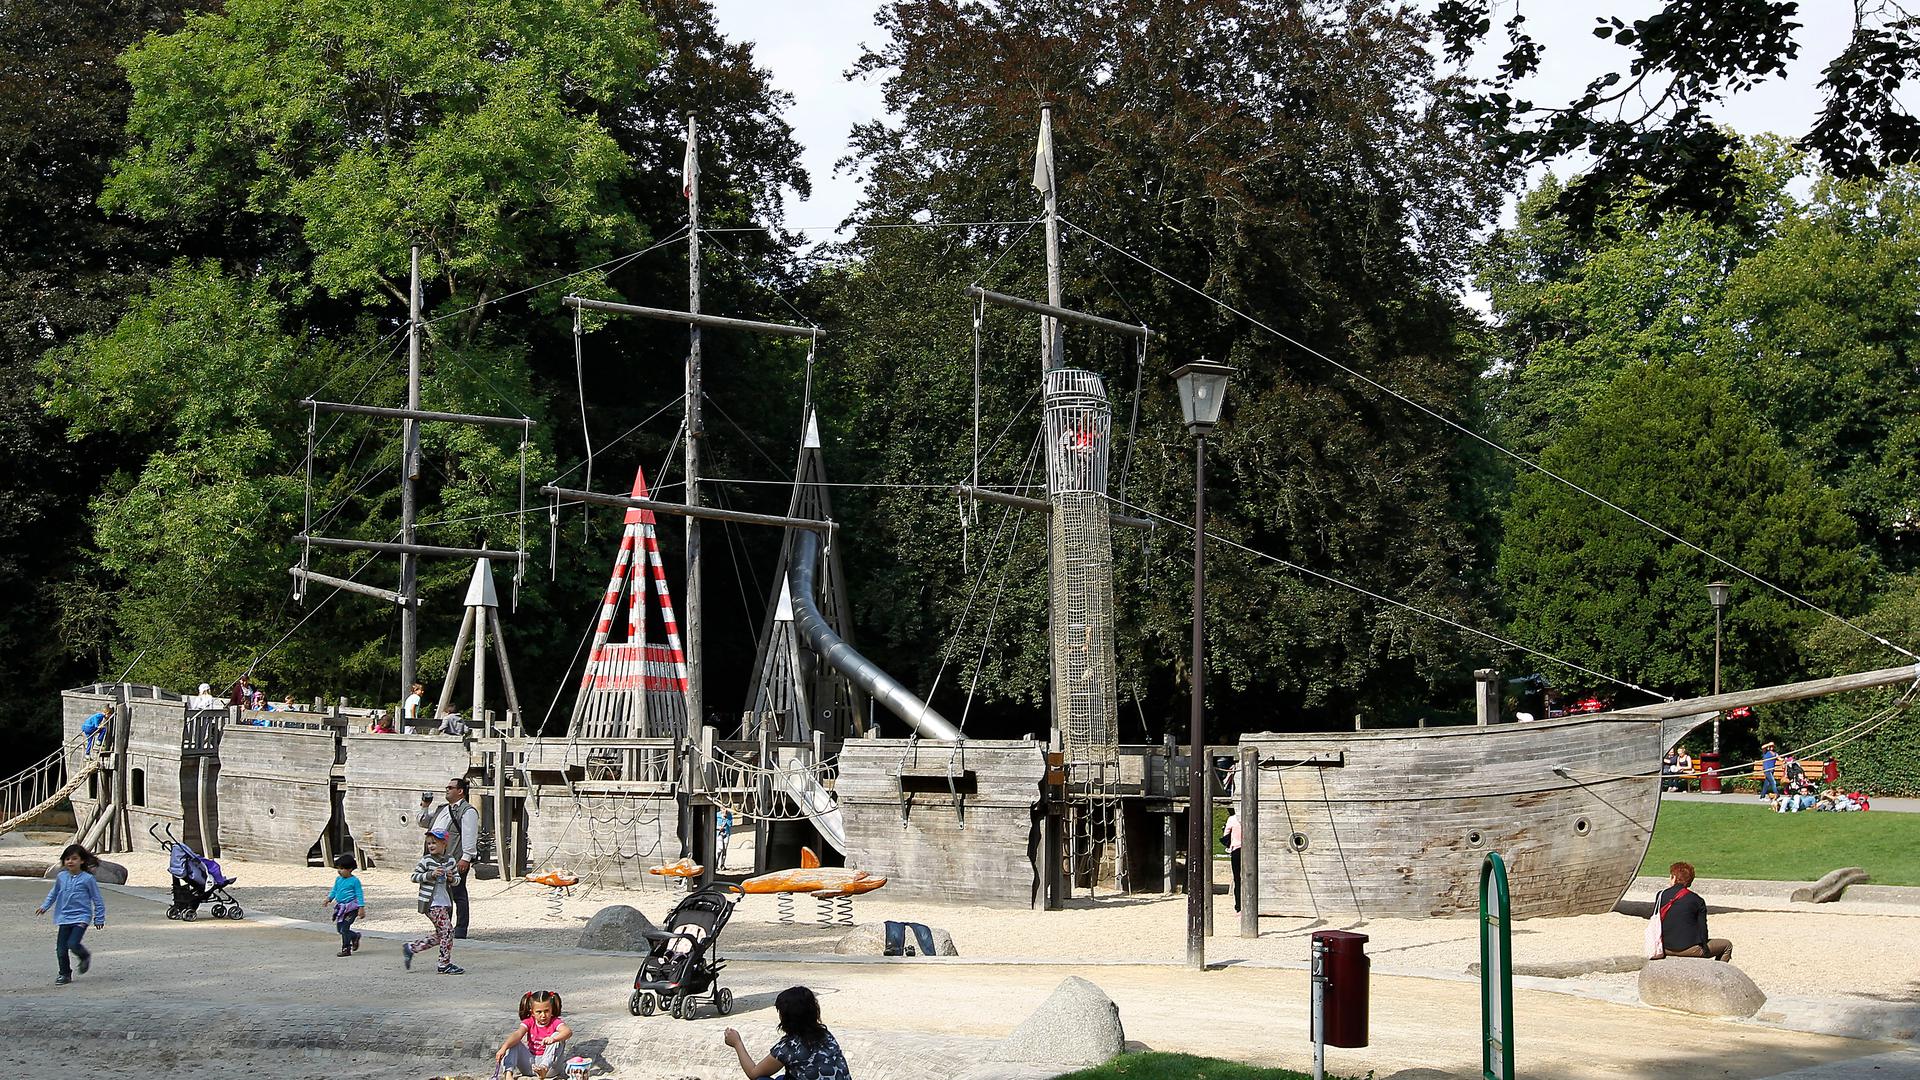 The pirate ship children's park in Luxembourg City Photo: Serge Waldbillig